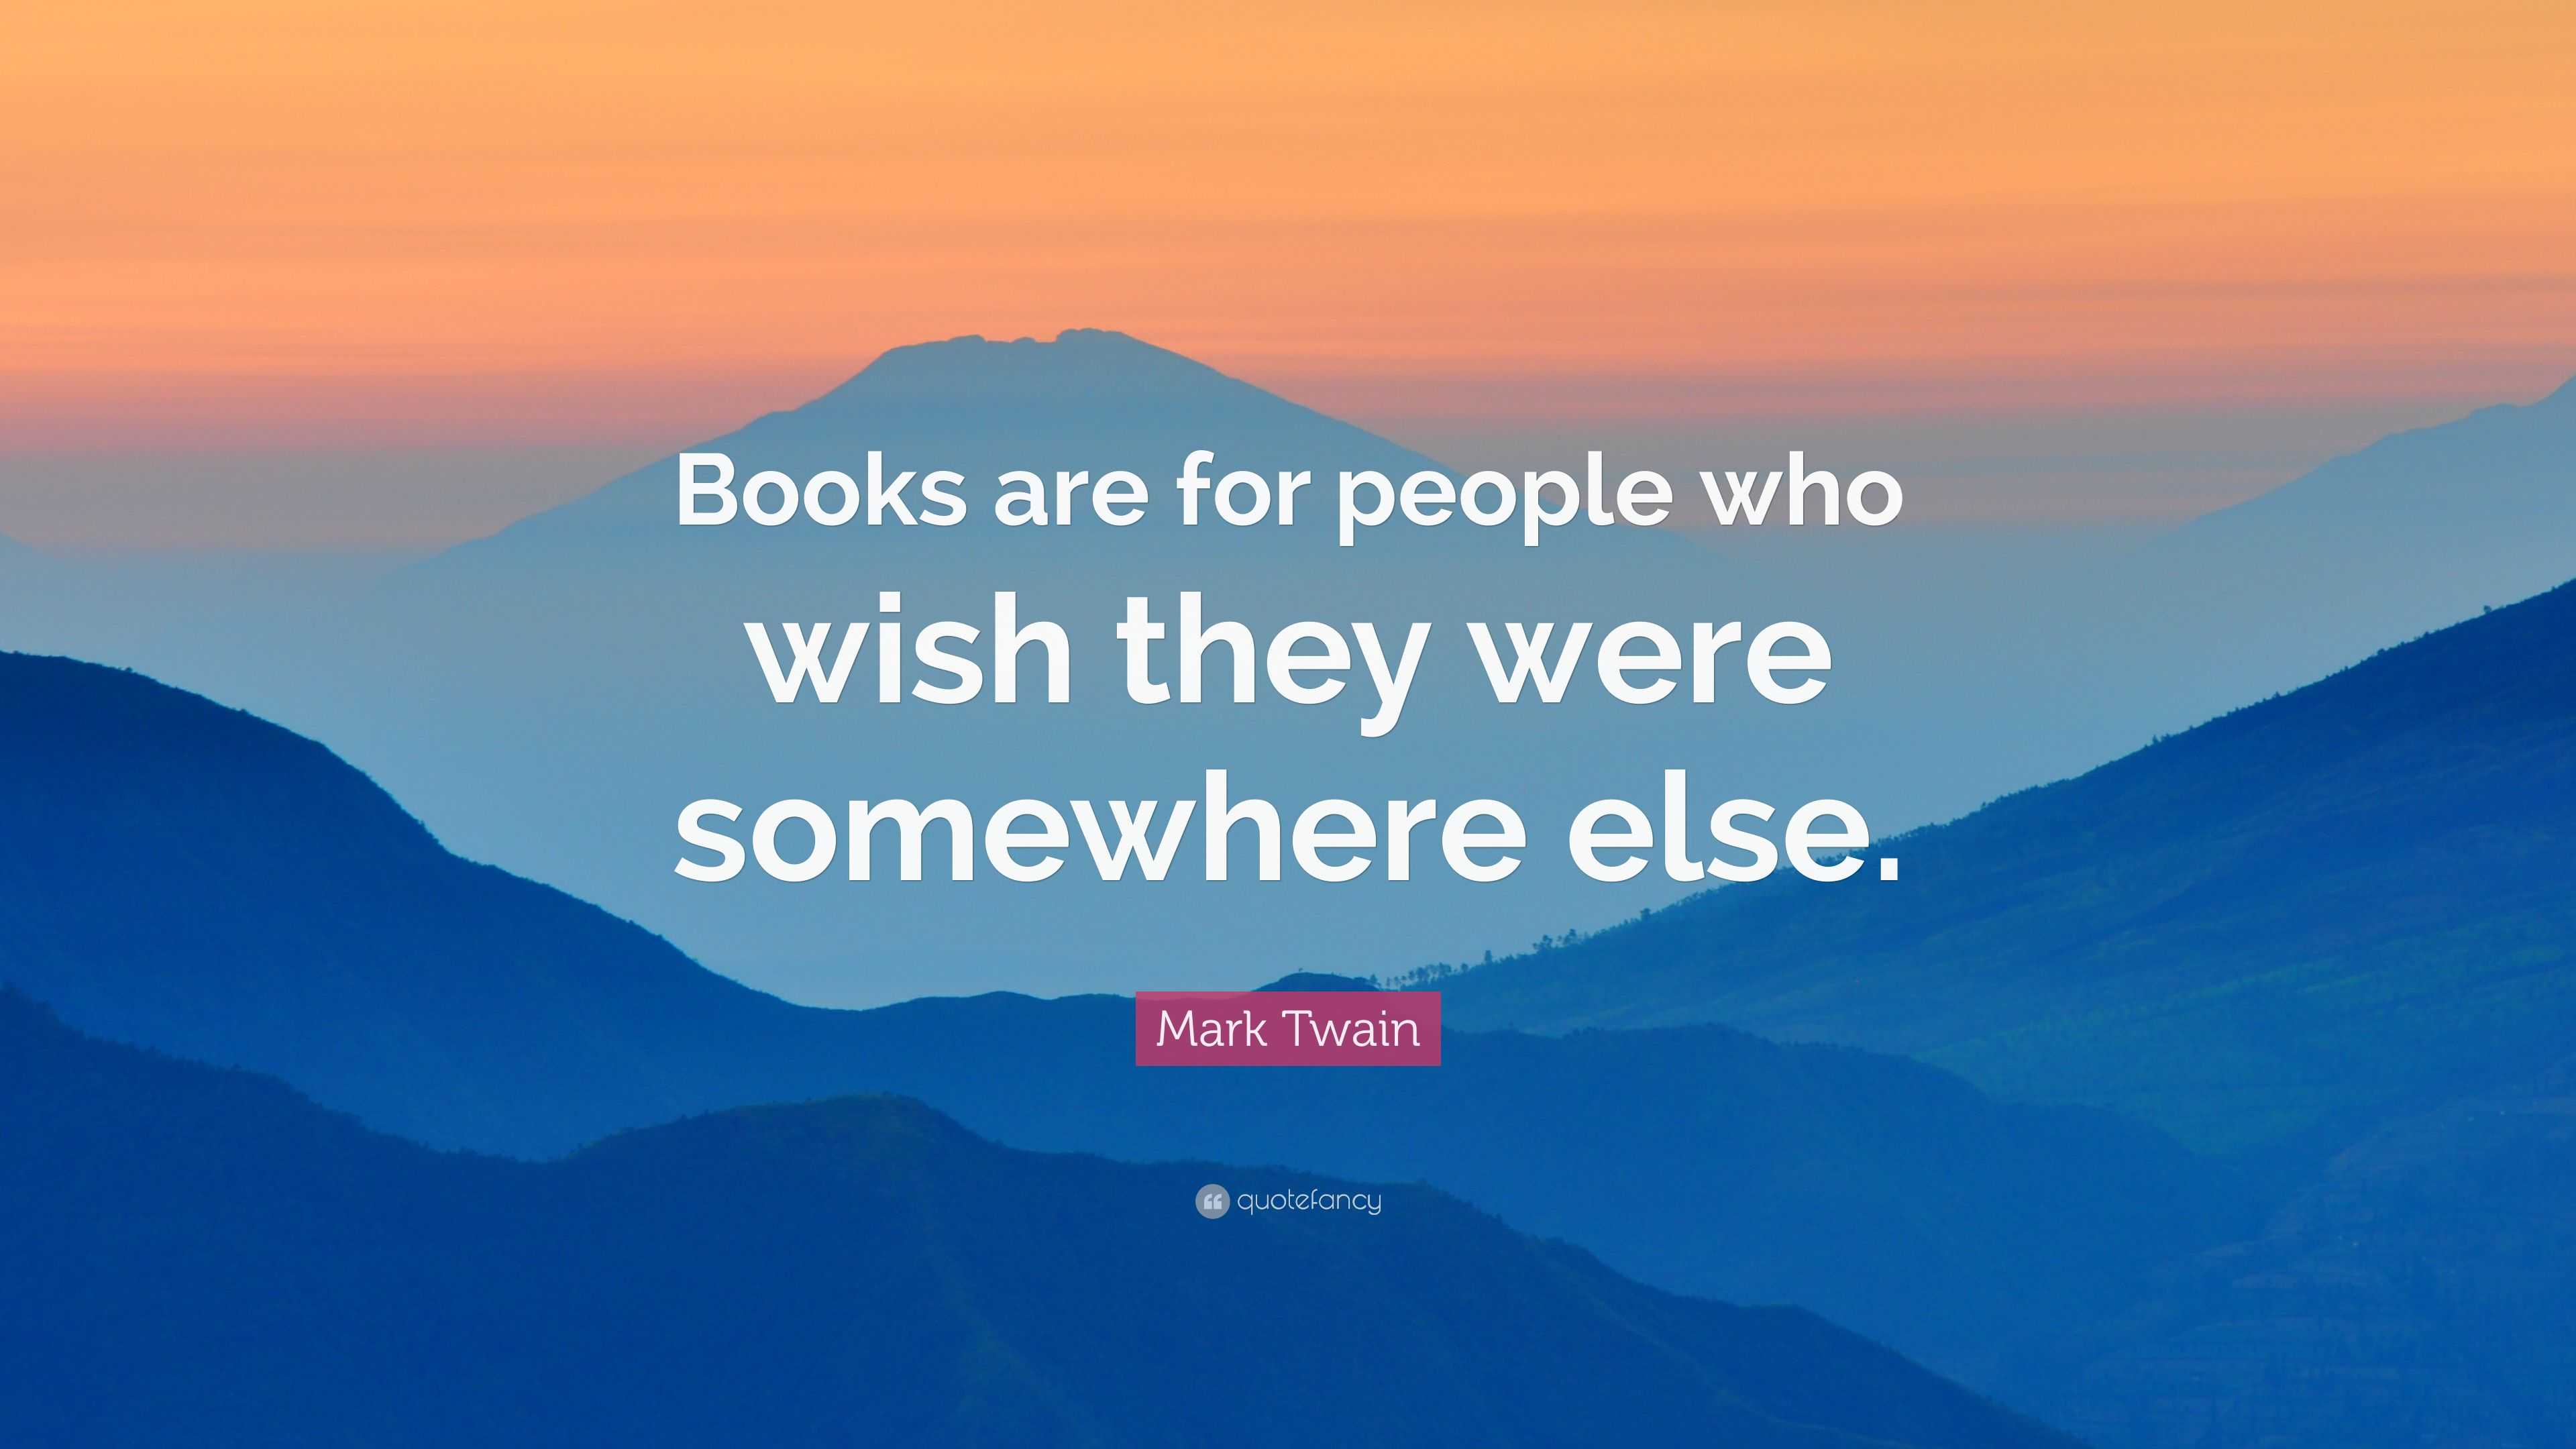 Mark Twain Quote: “Books are for people who wish they were somewhere else.”